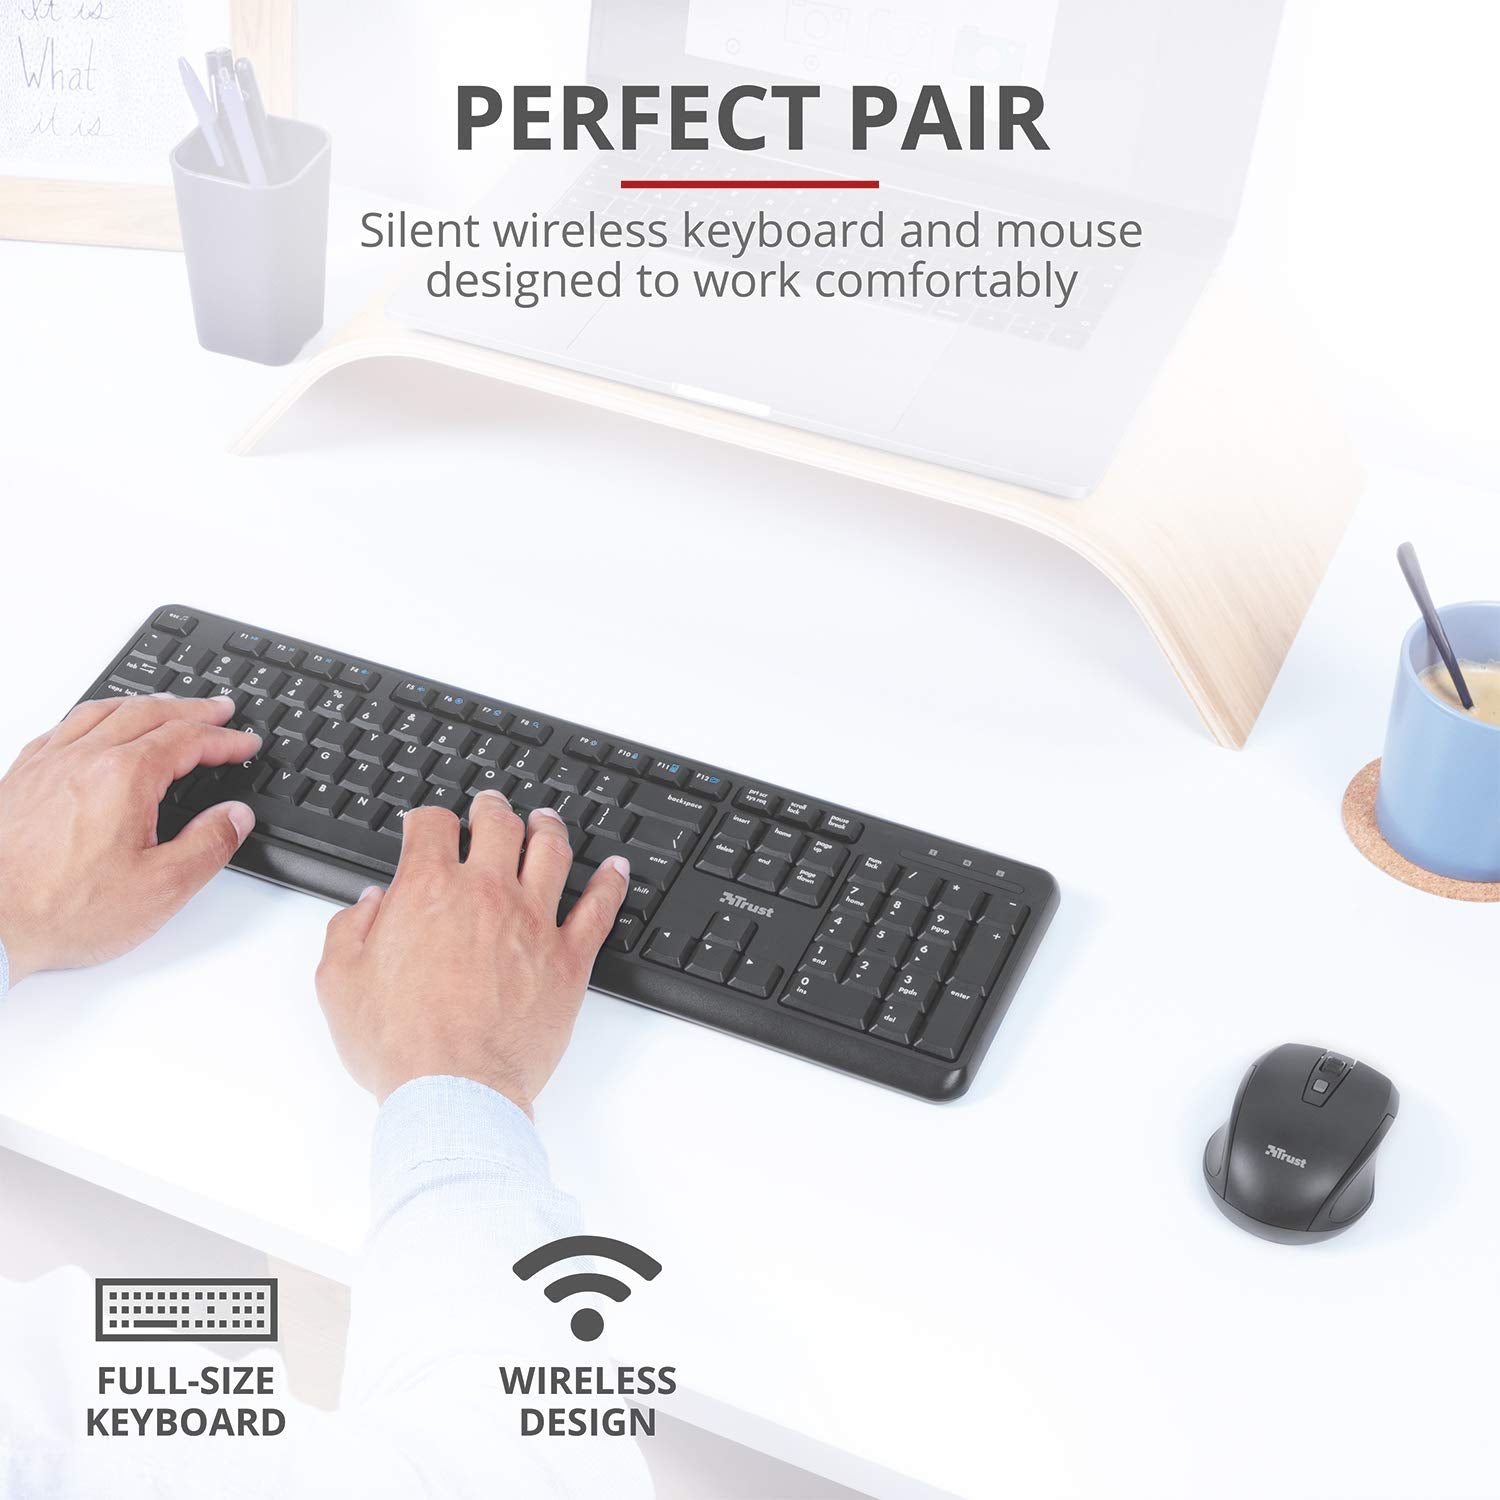 Trust Ymo Wireless Keyboard and Mouse Set, QWERTY UK Layout, Silent Keys, Full-Size Keyboard, Spill-Resistant, One USB Receiver, DPI Speed Button, Quiet Combo - Black [Amazon Exclusive]